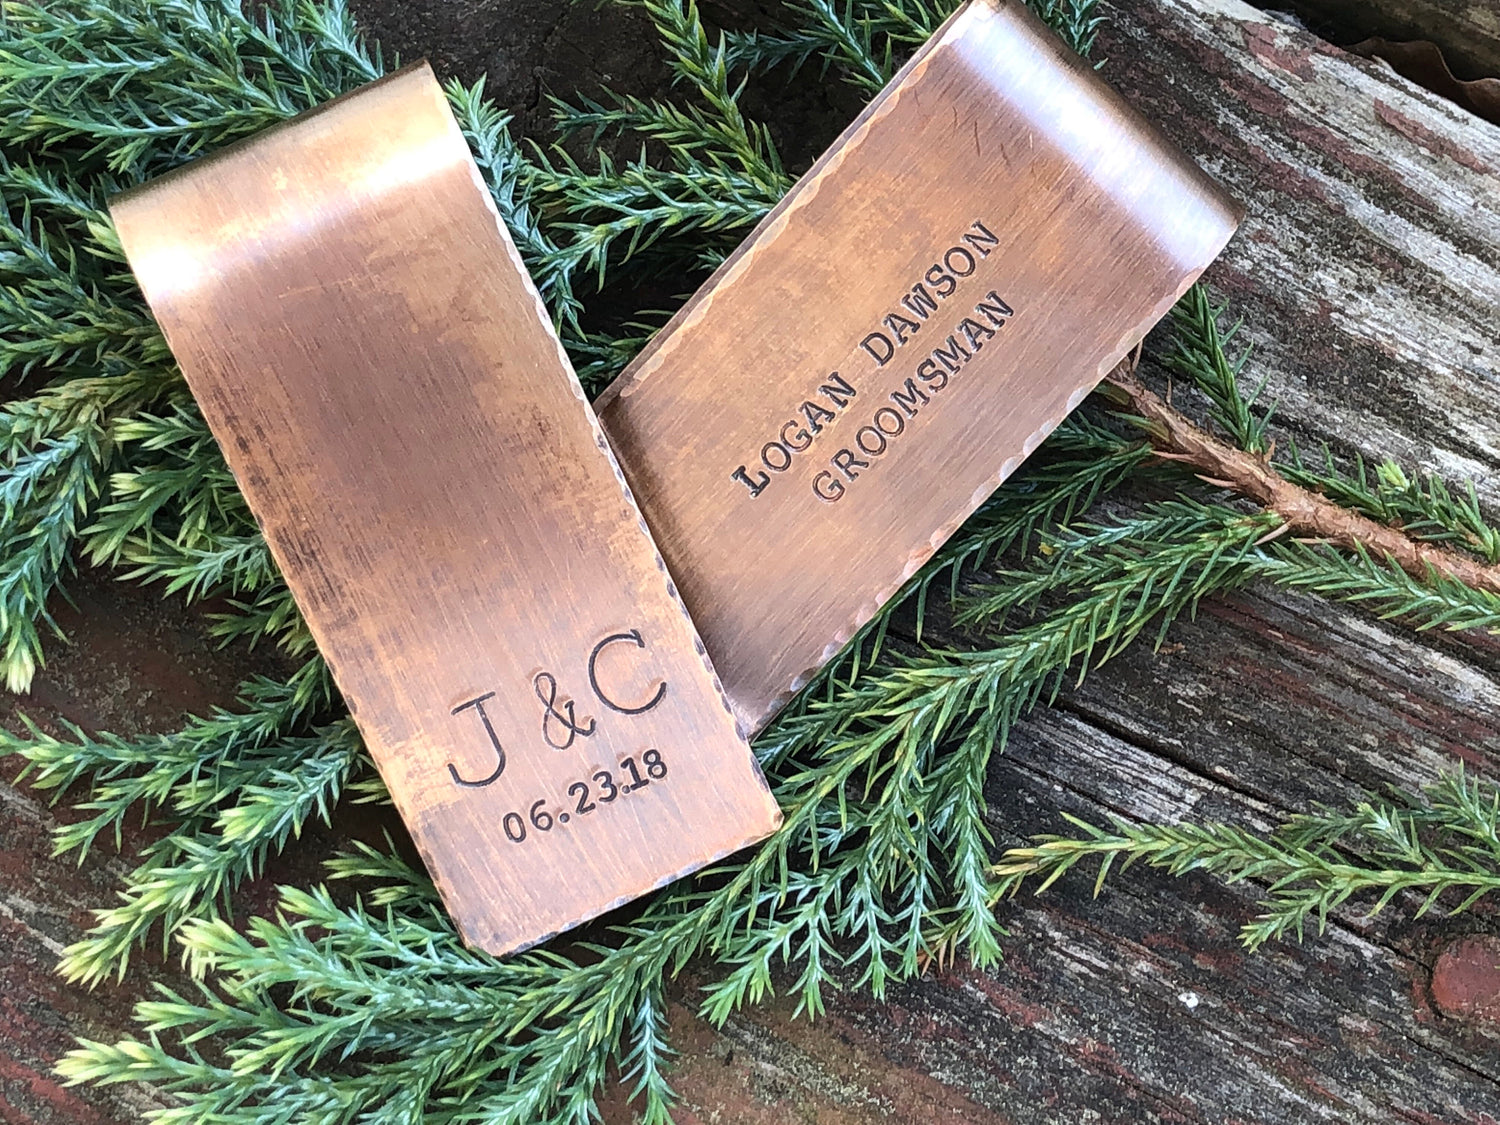 Custom Money Clips for Anniversary - 7th Anniversary Gift - Personalized  - Hand Crafted Money Clip in Bronze or Copper - 8th Anniversary